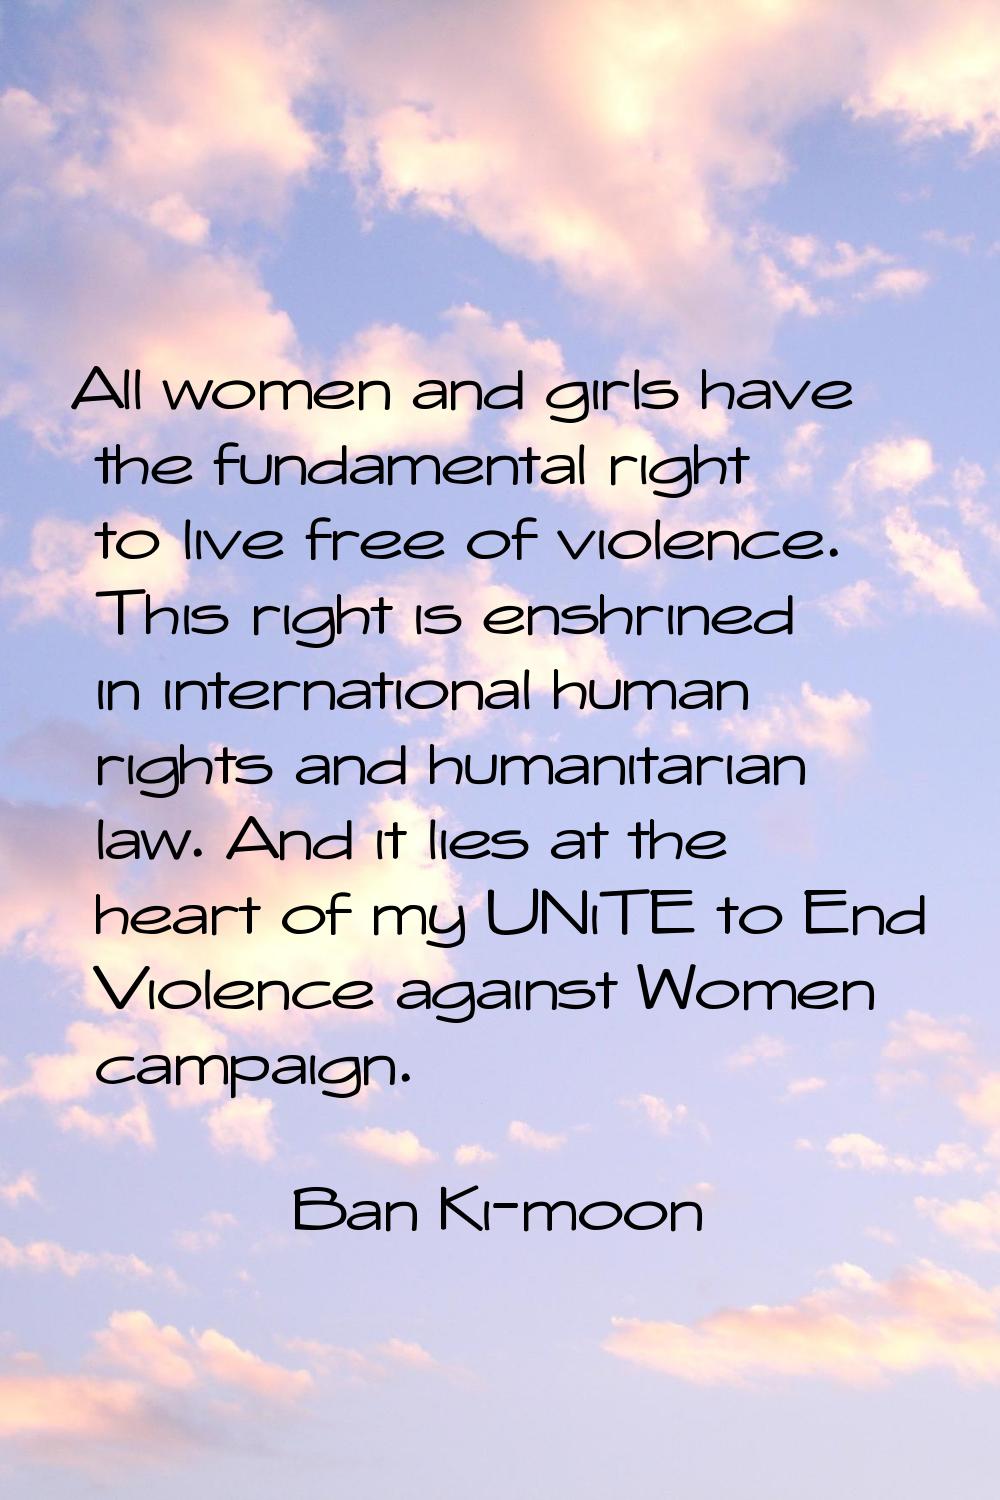 All women and girls have the fundamental right to live free of violence. This right is enshrined in